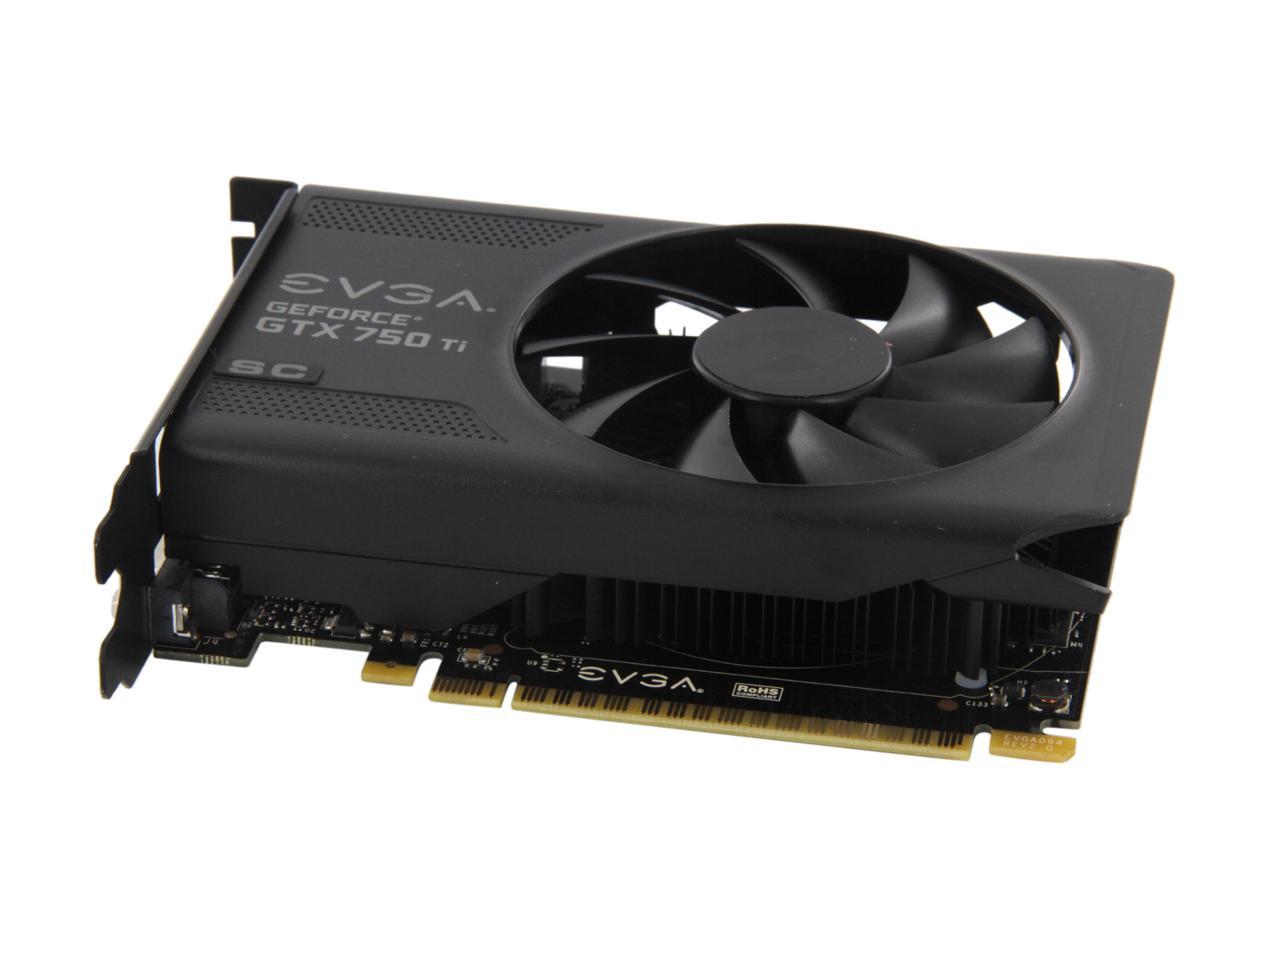 Understand And Buy Evga Gtx 750 Ti Drivers Cheap Online